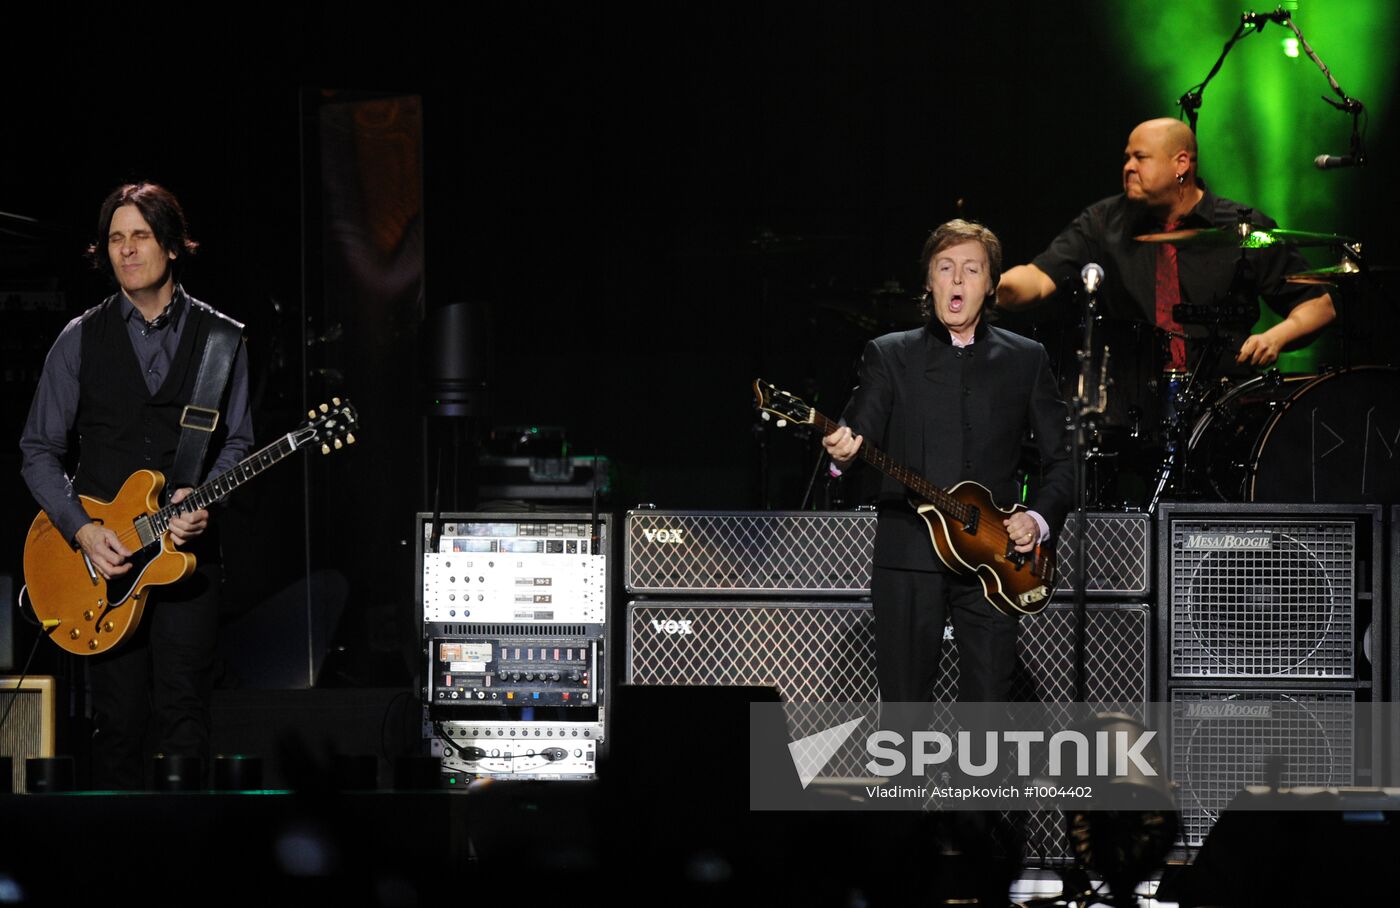 Paul McCartney performs live in Moscow